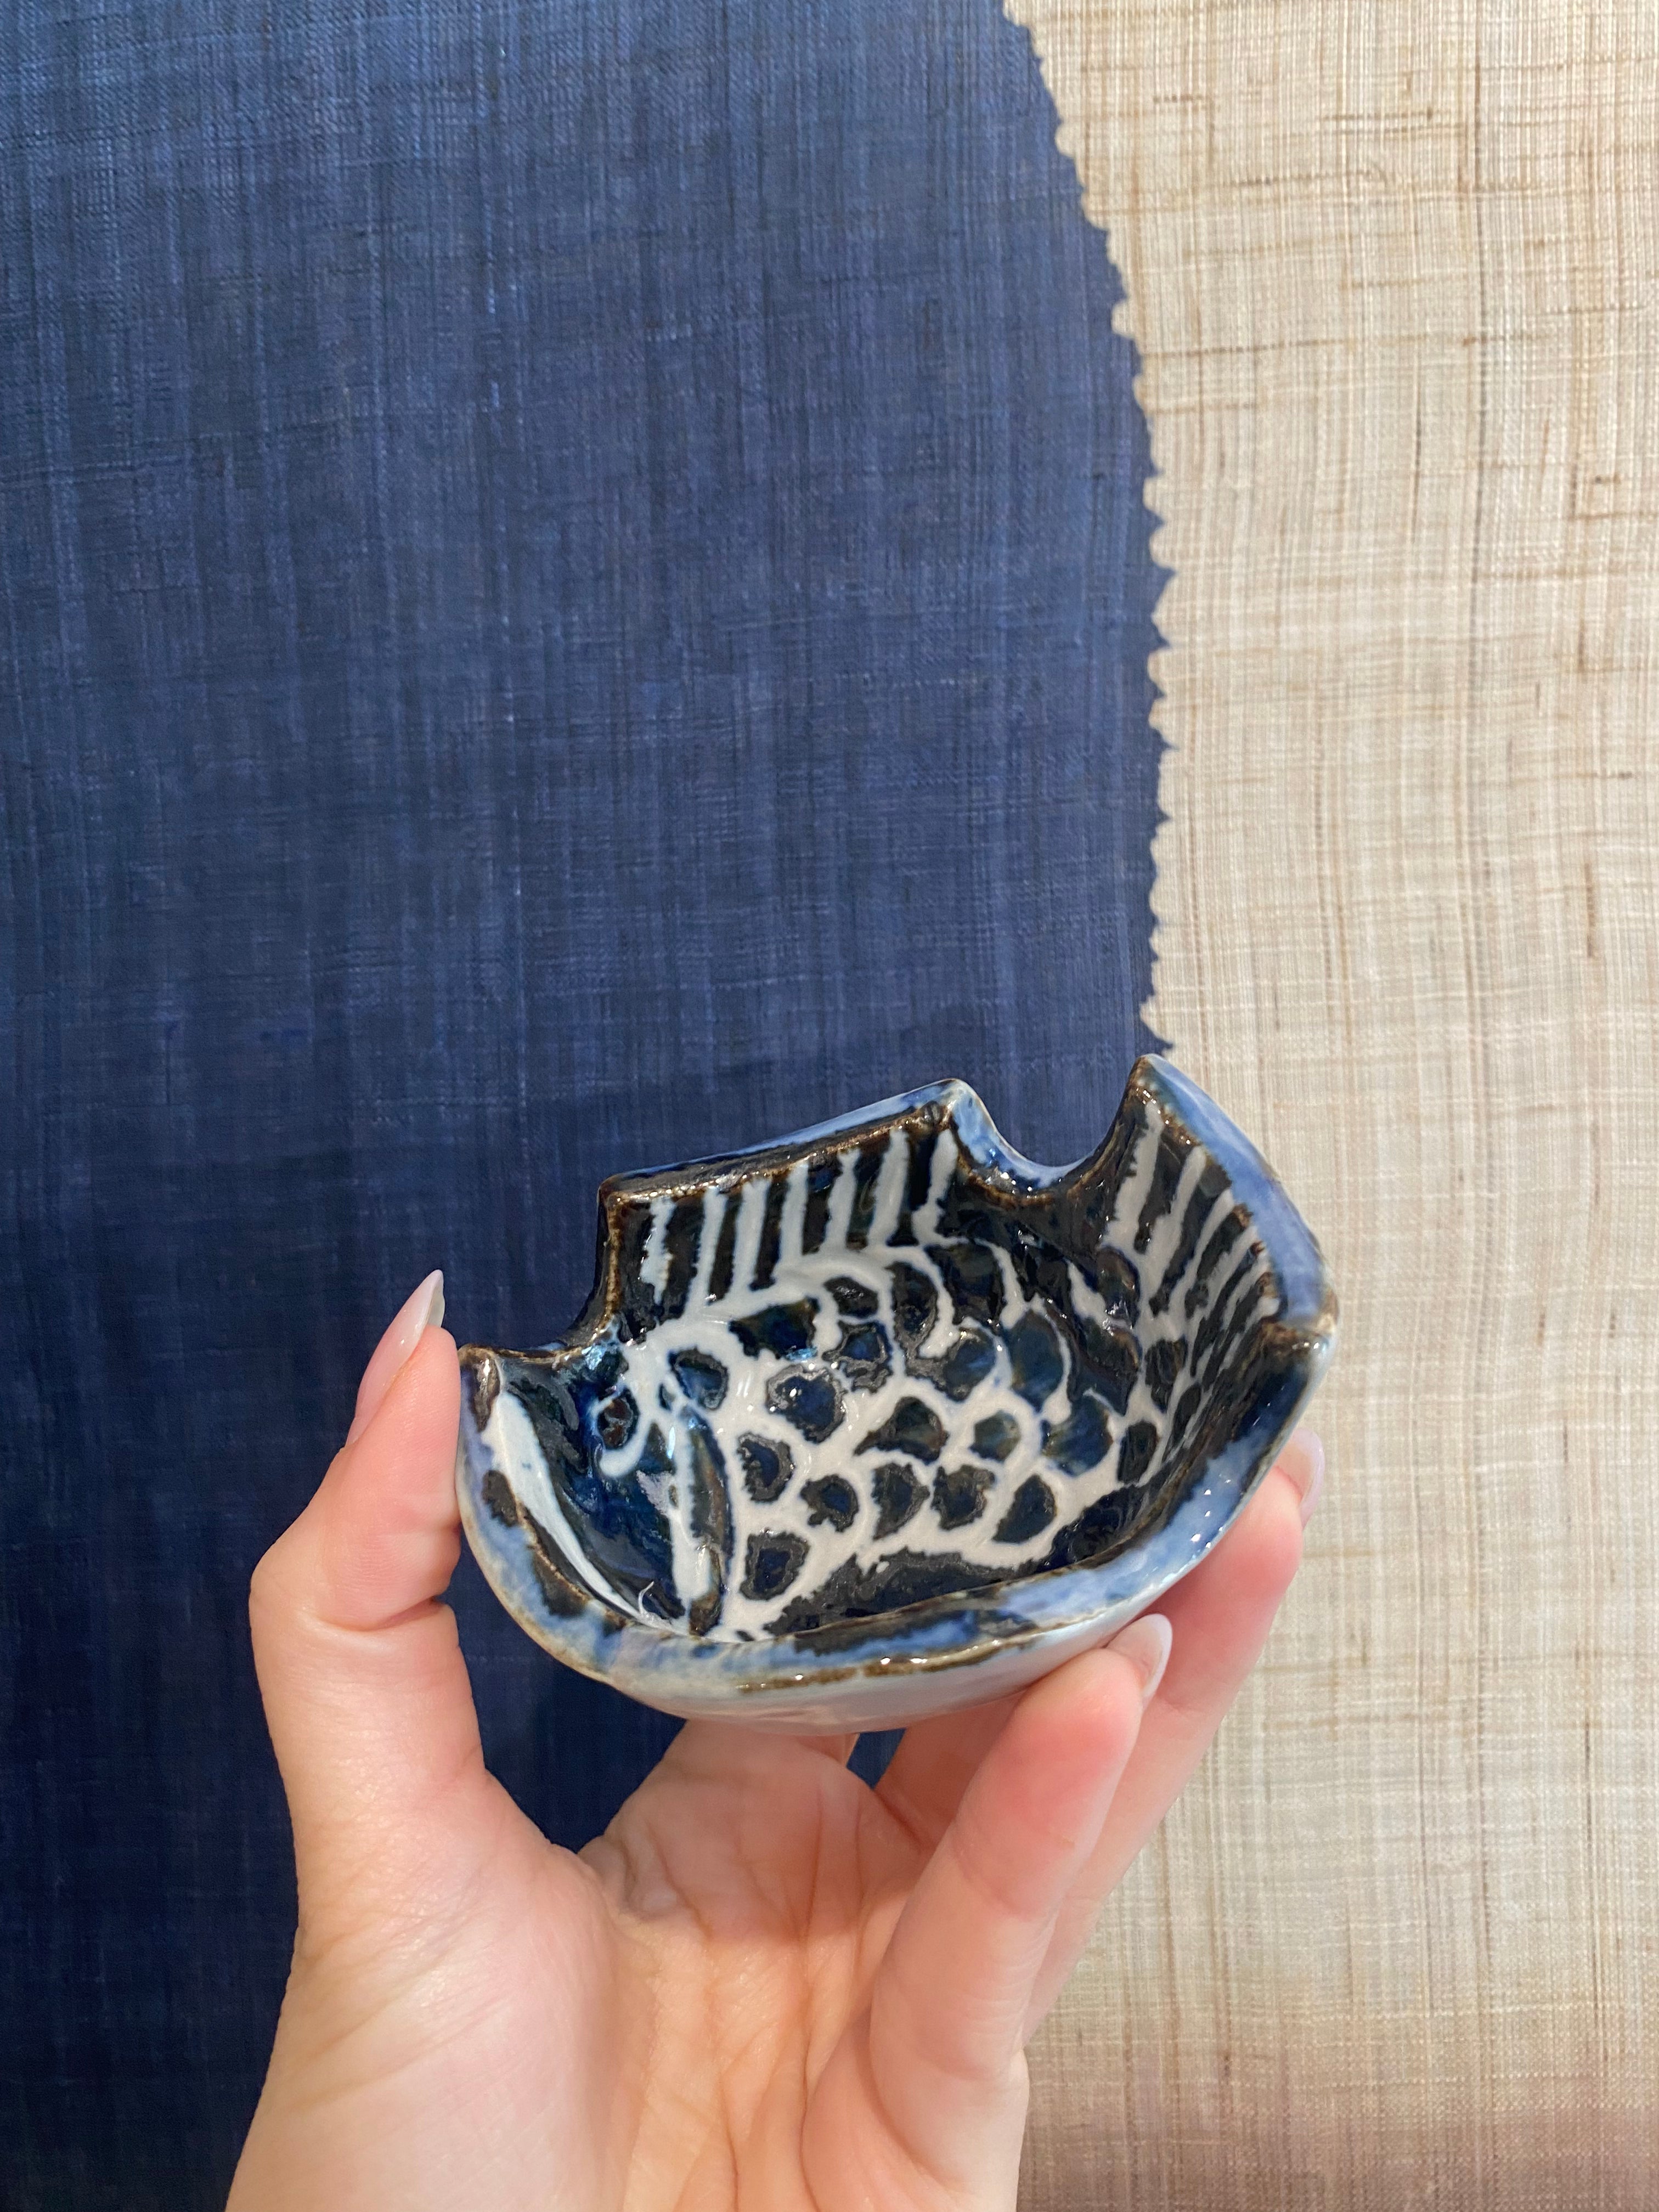 Small fish bowl with blue glaze